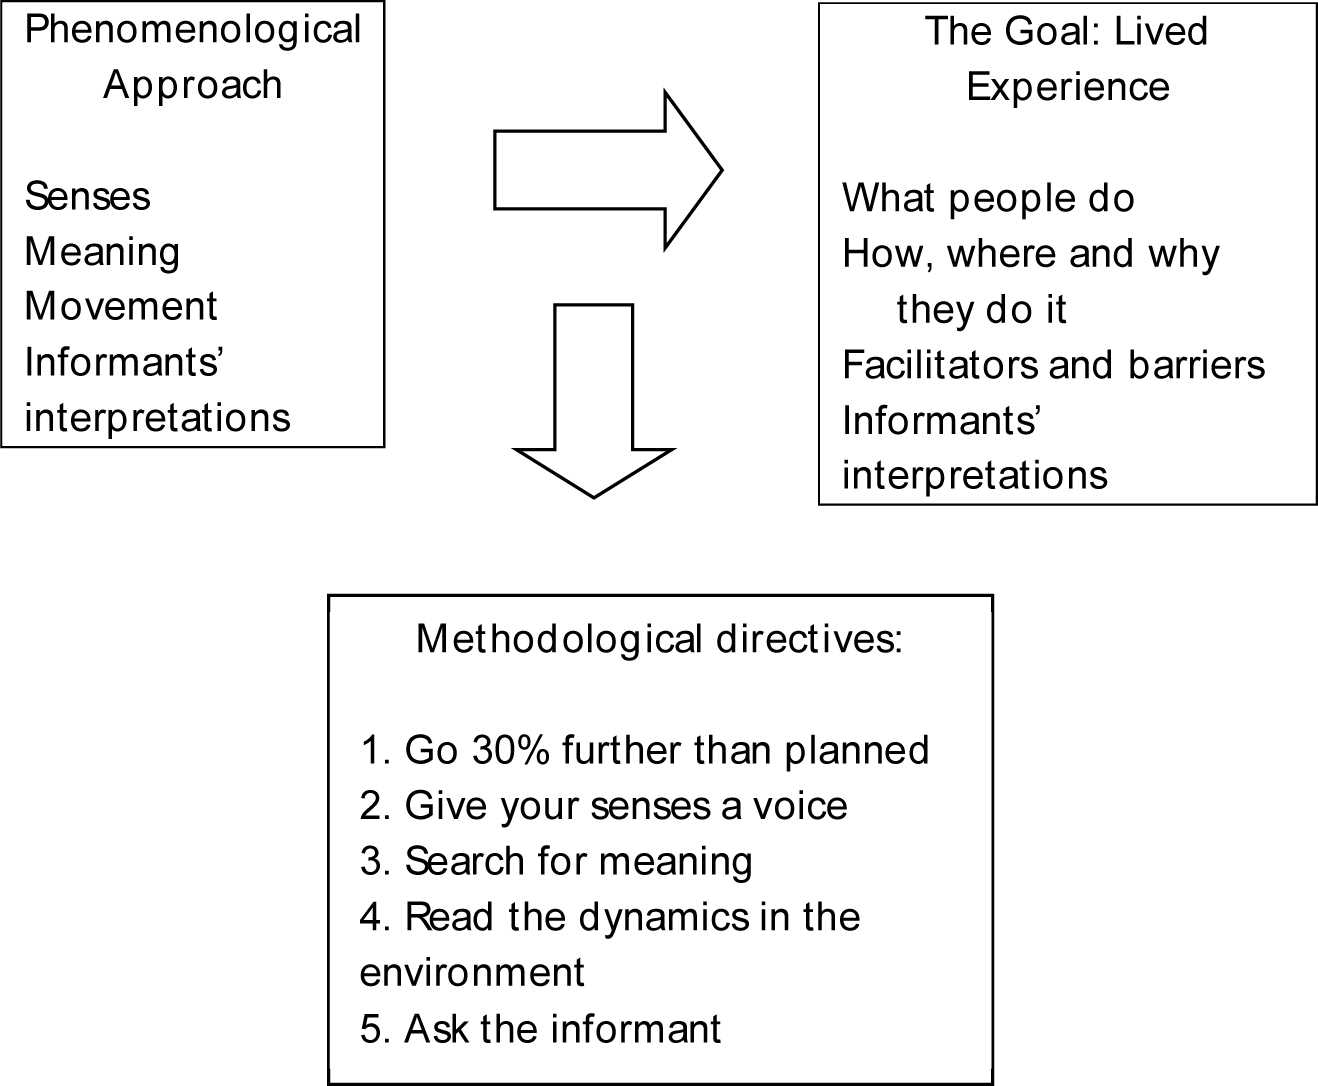 Diagram showing text in three boxes: 1. Phenomenological Approach: Senses, Meaning, Movement, Informants' interpretations. 2. The Goal: Lived Experience: What people do, How, where and why they do it, Facilitators and barriers, Informants' interpretations. 3. Methodological Directives: Go 30% further than planned, Give your senses a voice, Search for meaning, Read the dynamics in the environment, Ask the informant. Arrows points from box 1 to box 2, and from the middle of the first arrow down to box 3.